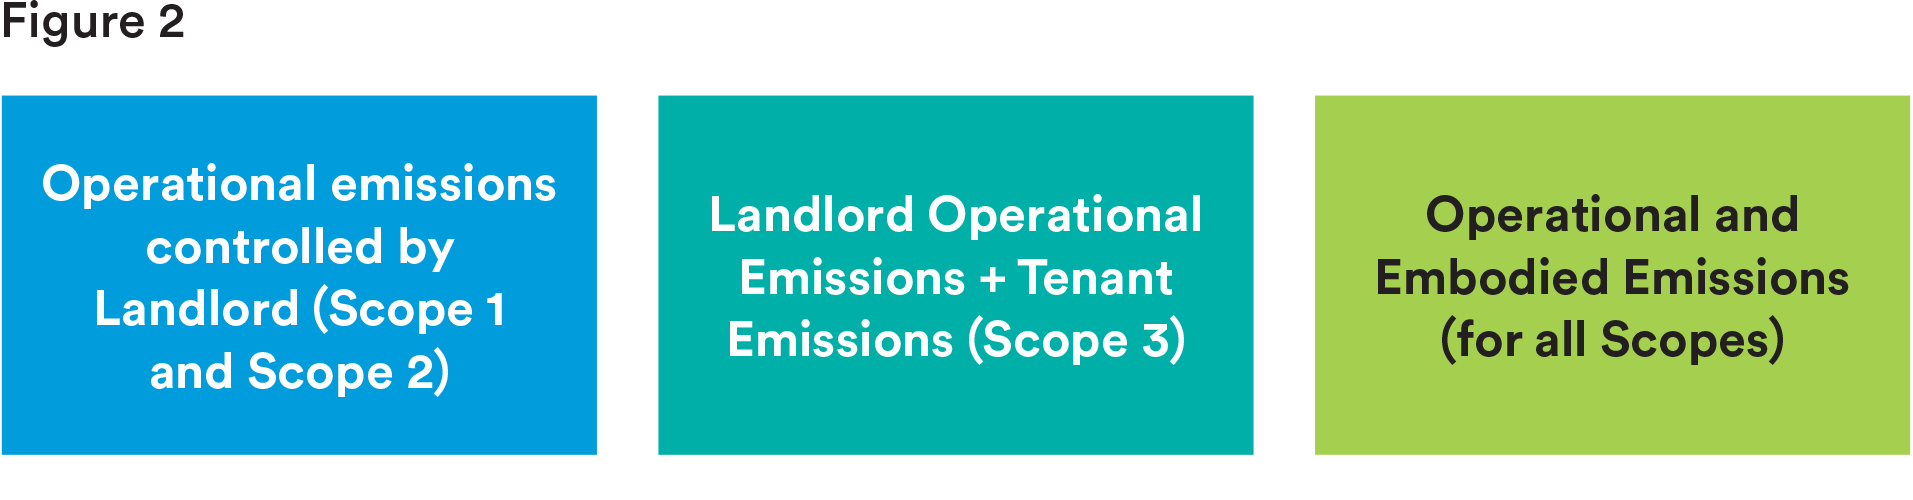 /></figure>
<!-- /wp:image -->

<!-- wp:paragraph -->
<p>Landlords who are committed to carbon neutrality can serve as a resource for their tenants, sharing tips and tools for carbon reduction. For example, MIM sometimes recommends its U.S. office tenants utilize <a href=